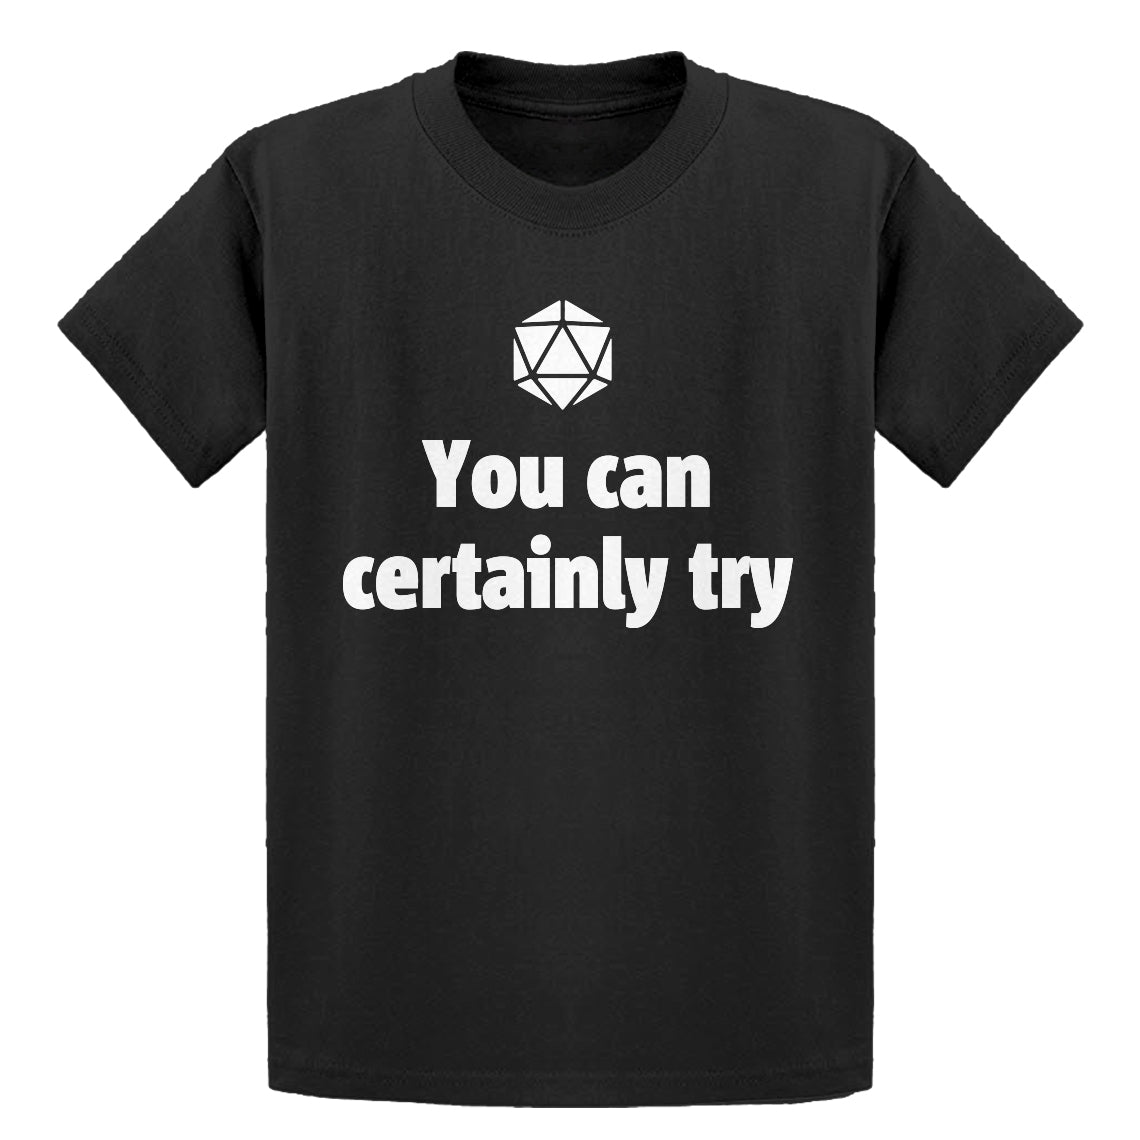 Youth You Can Certainly Try DnD Kids T-shirt